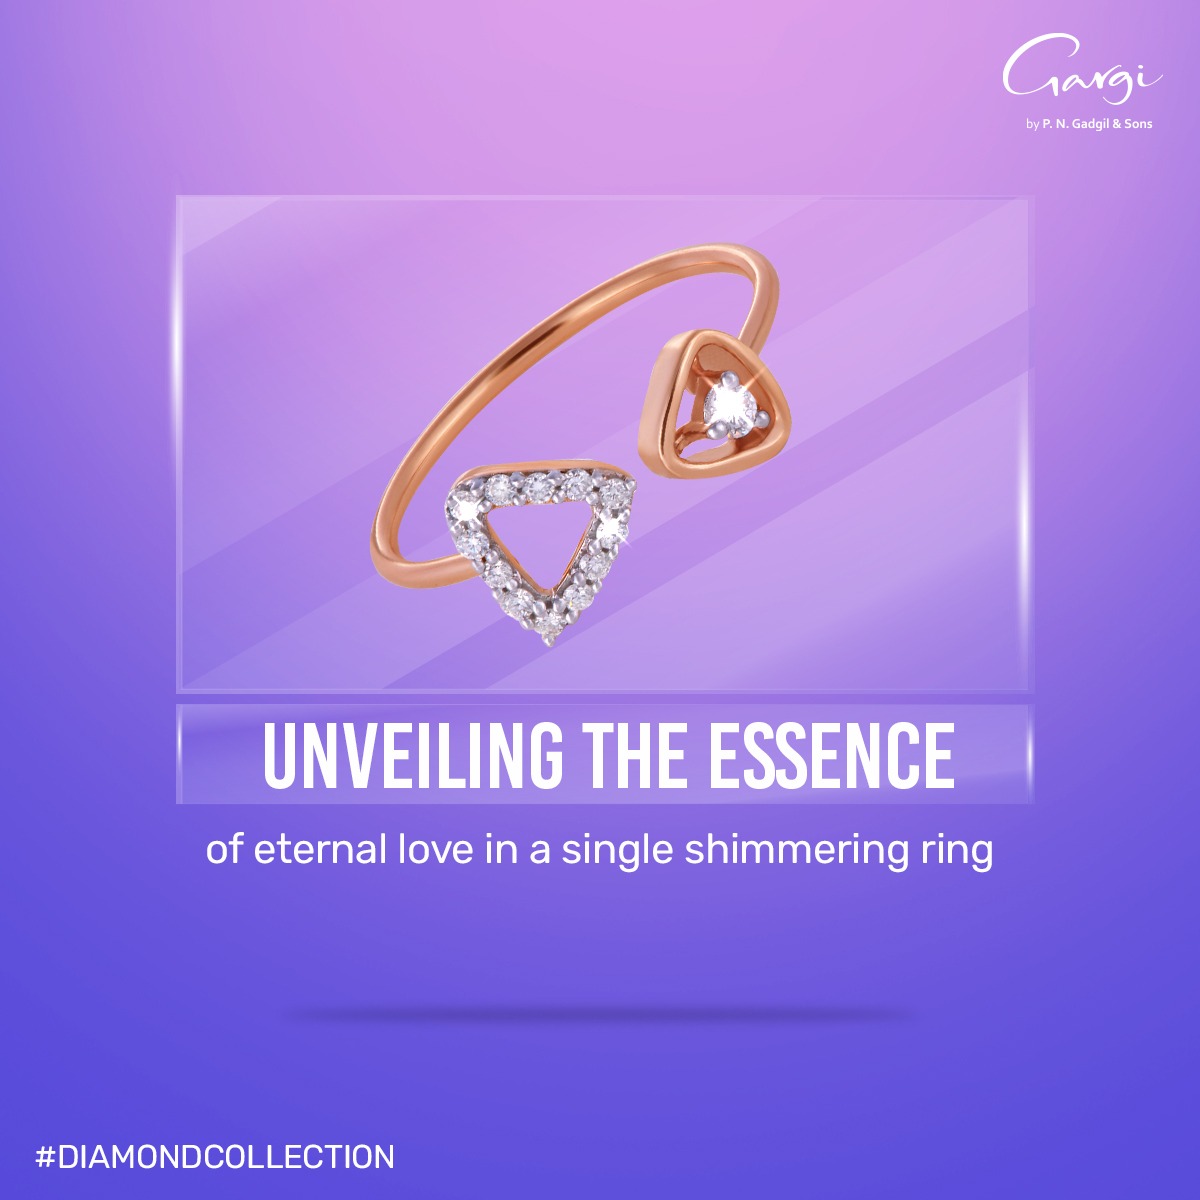 Capturing the timeless beauty of eternal love in a single, shimmering ring—a testament to a love that glows as brightly as the most brilliant stars. 💍✨

📍Visit your nearest Gargi store!

#diamonds #diamondcollection #jewellery #ring #ringsofinstagram #diamondring